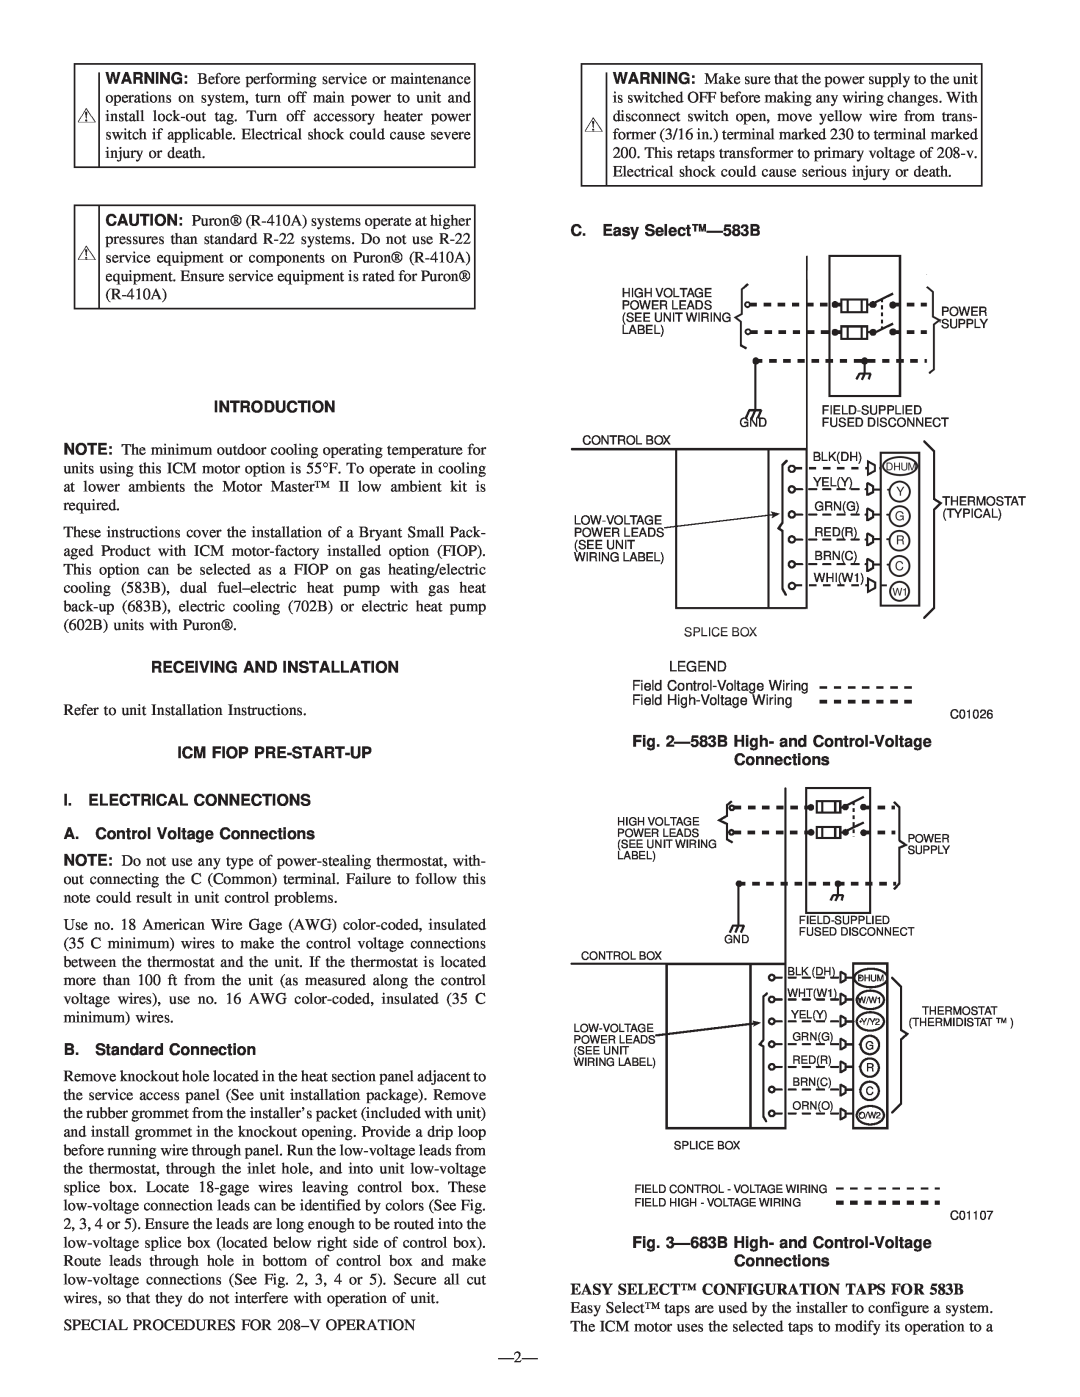 Bryant 683B C. Easy SelectÐ583B, Introduction, Receiving And Installation, Icm Fiop Pre-Start-Up I. Electrical Connections 